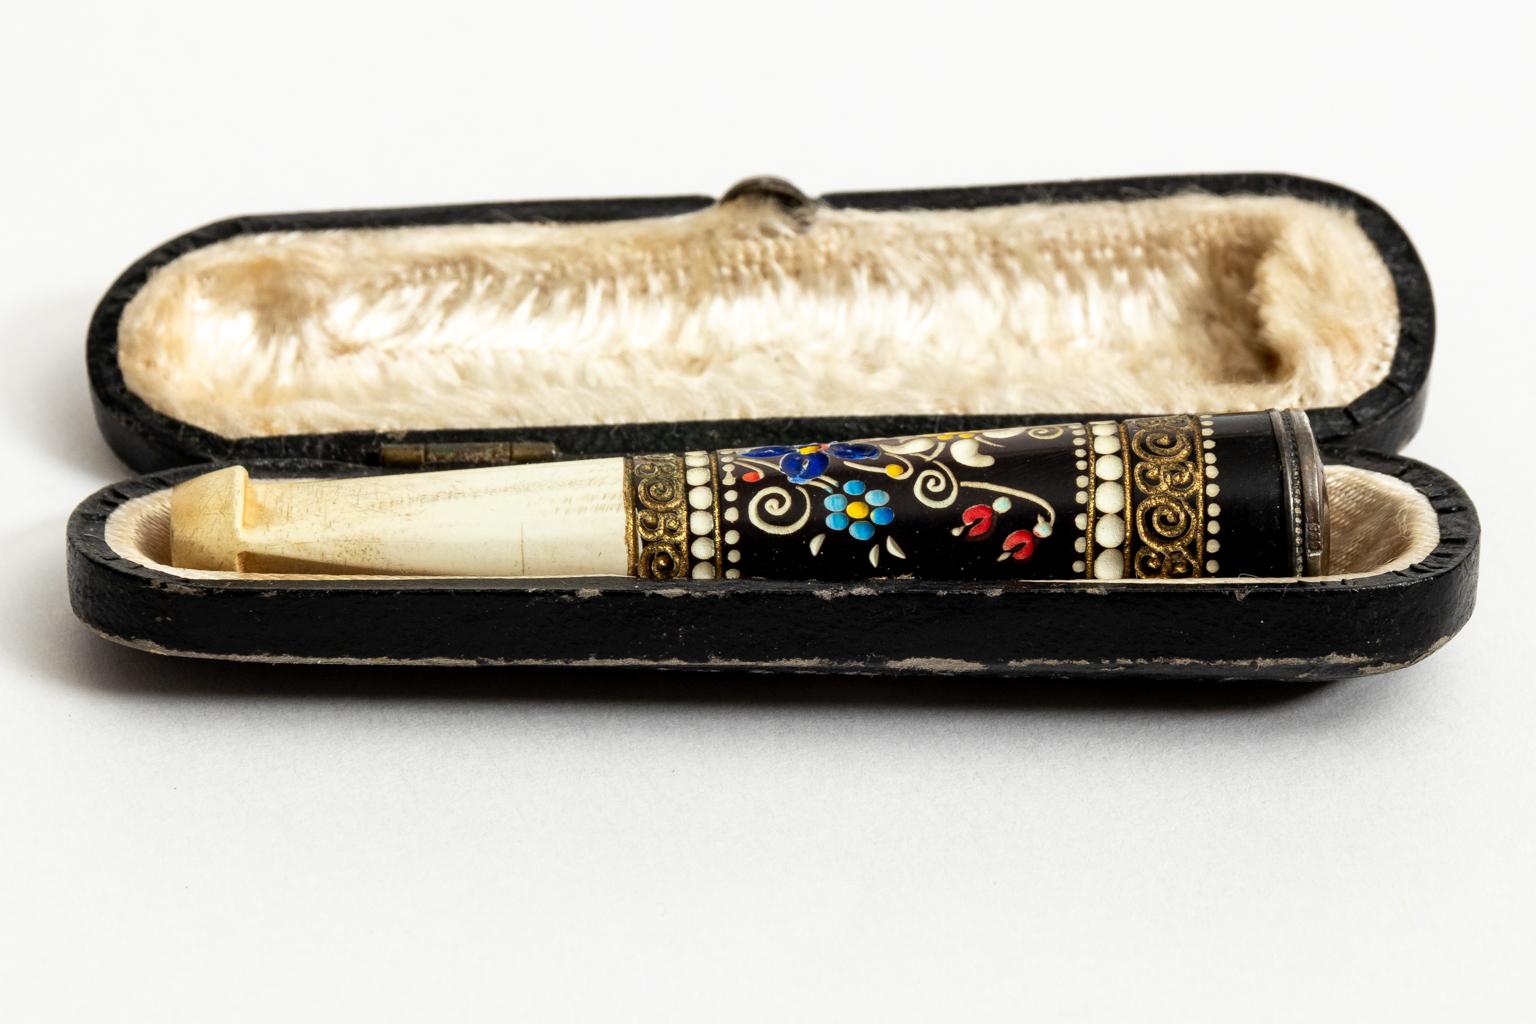 Silver and bone cigarette holder with original case and a top marked 935. The latch of the case is still functional. The piece also features enamel work depicting motifs such as multi-color flowers framed by scroll and bead trim. Made in Austria,